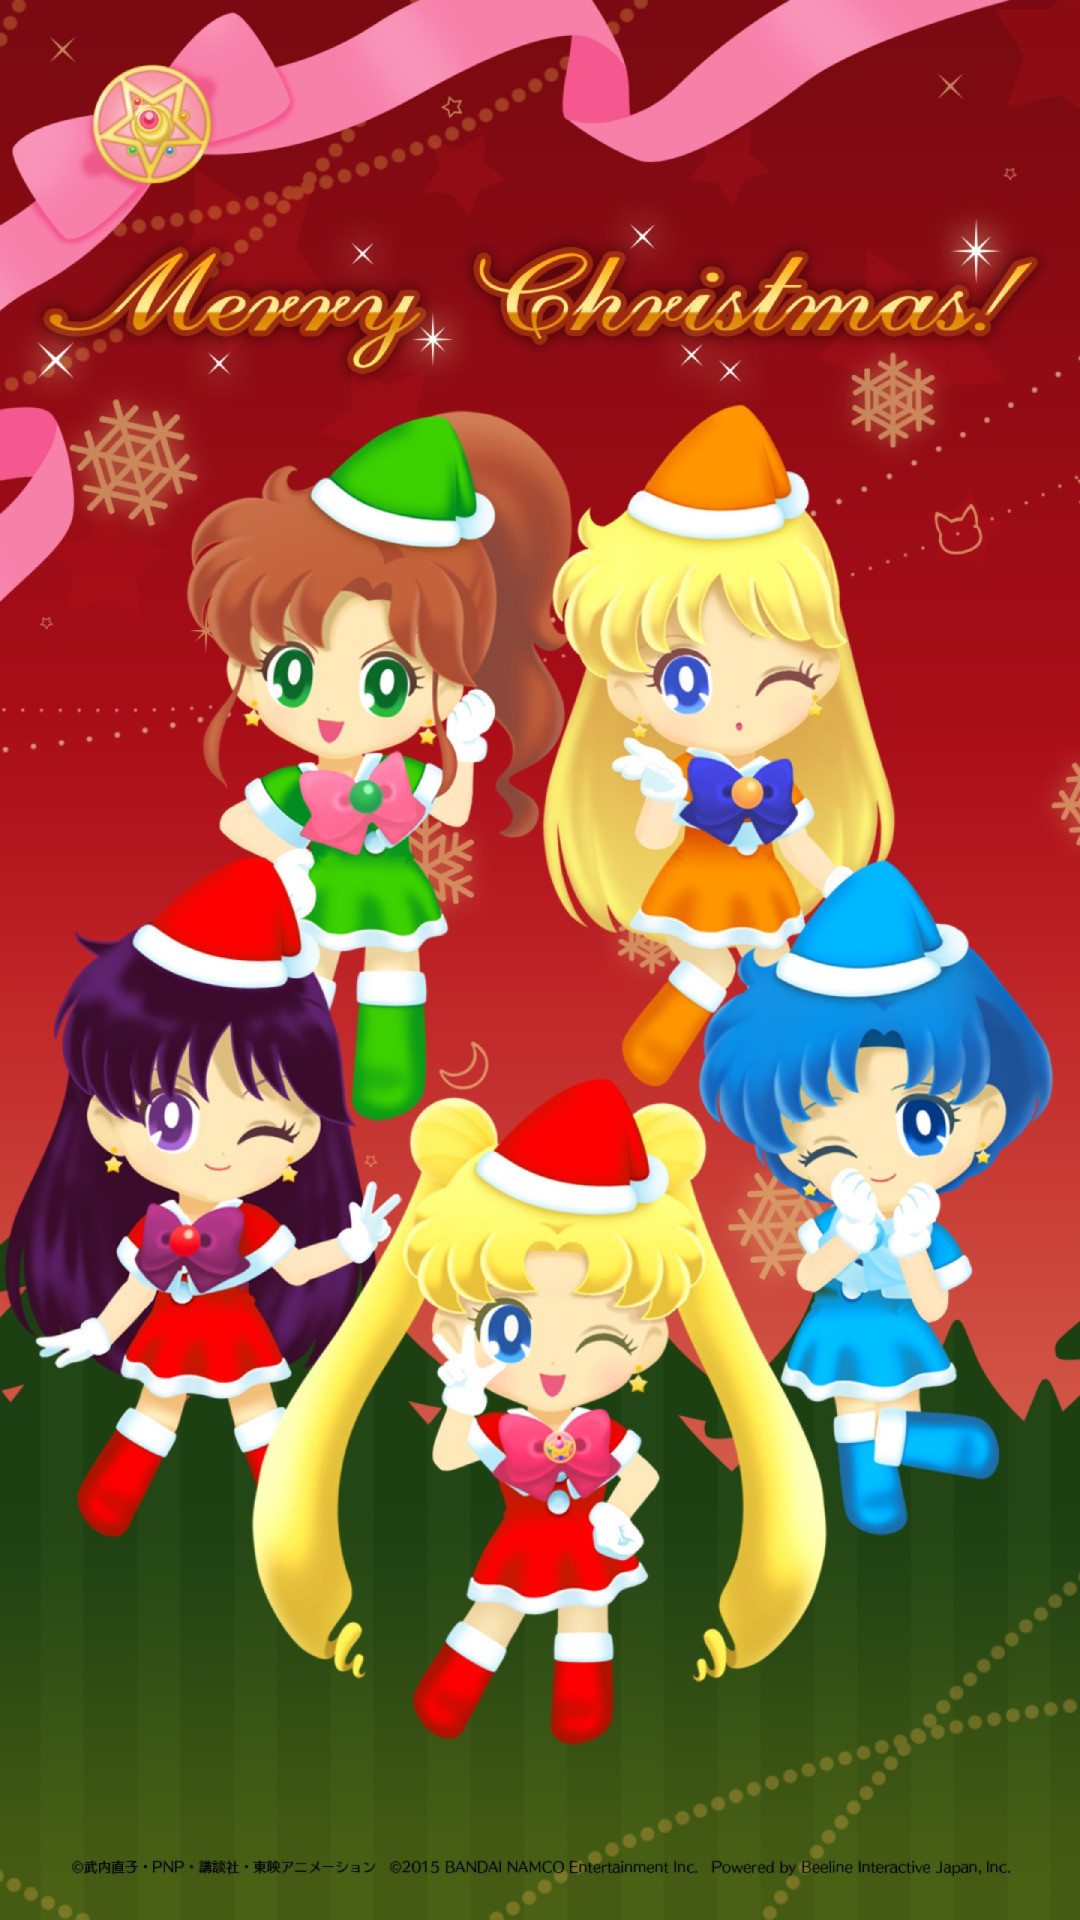 Wallpaper from Christmas event by Sailor moon drop game!